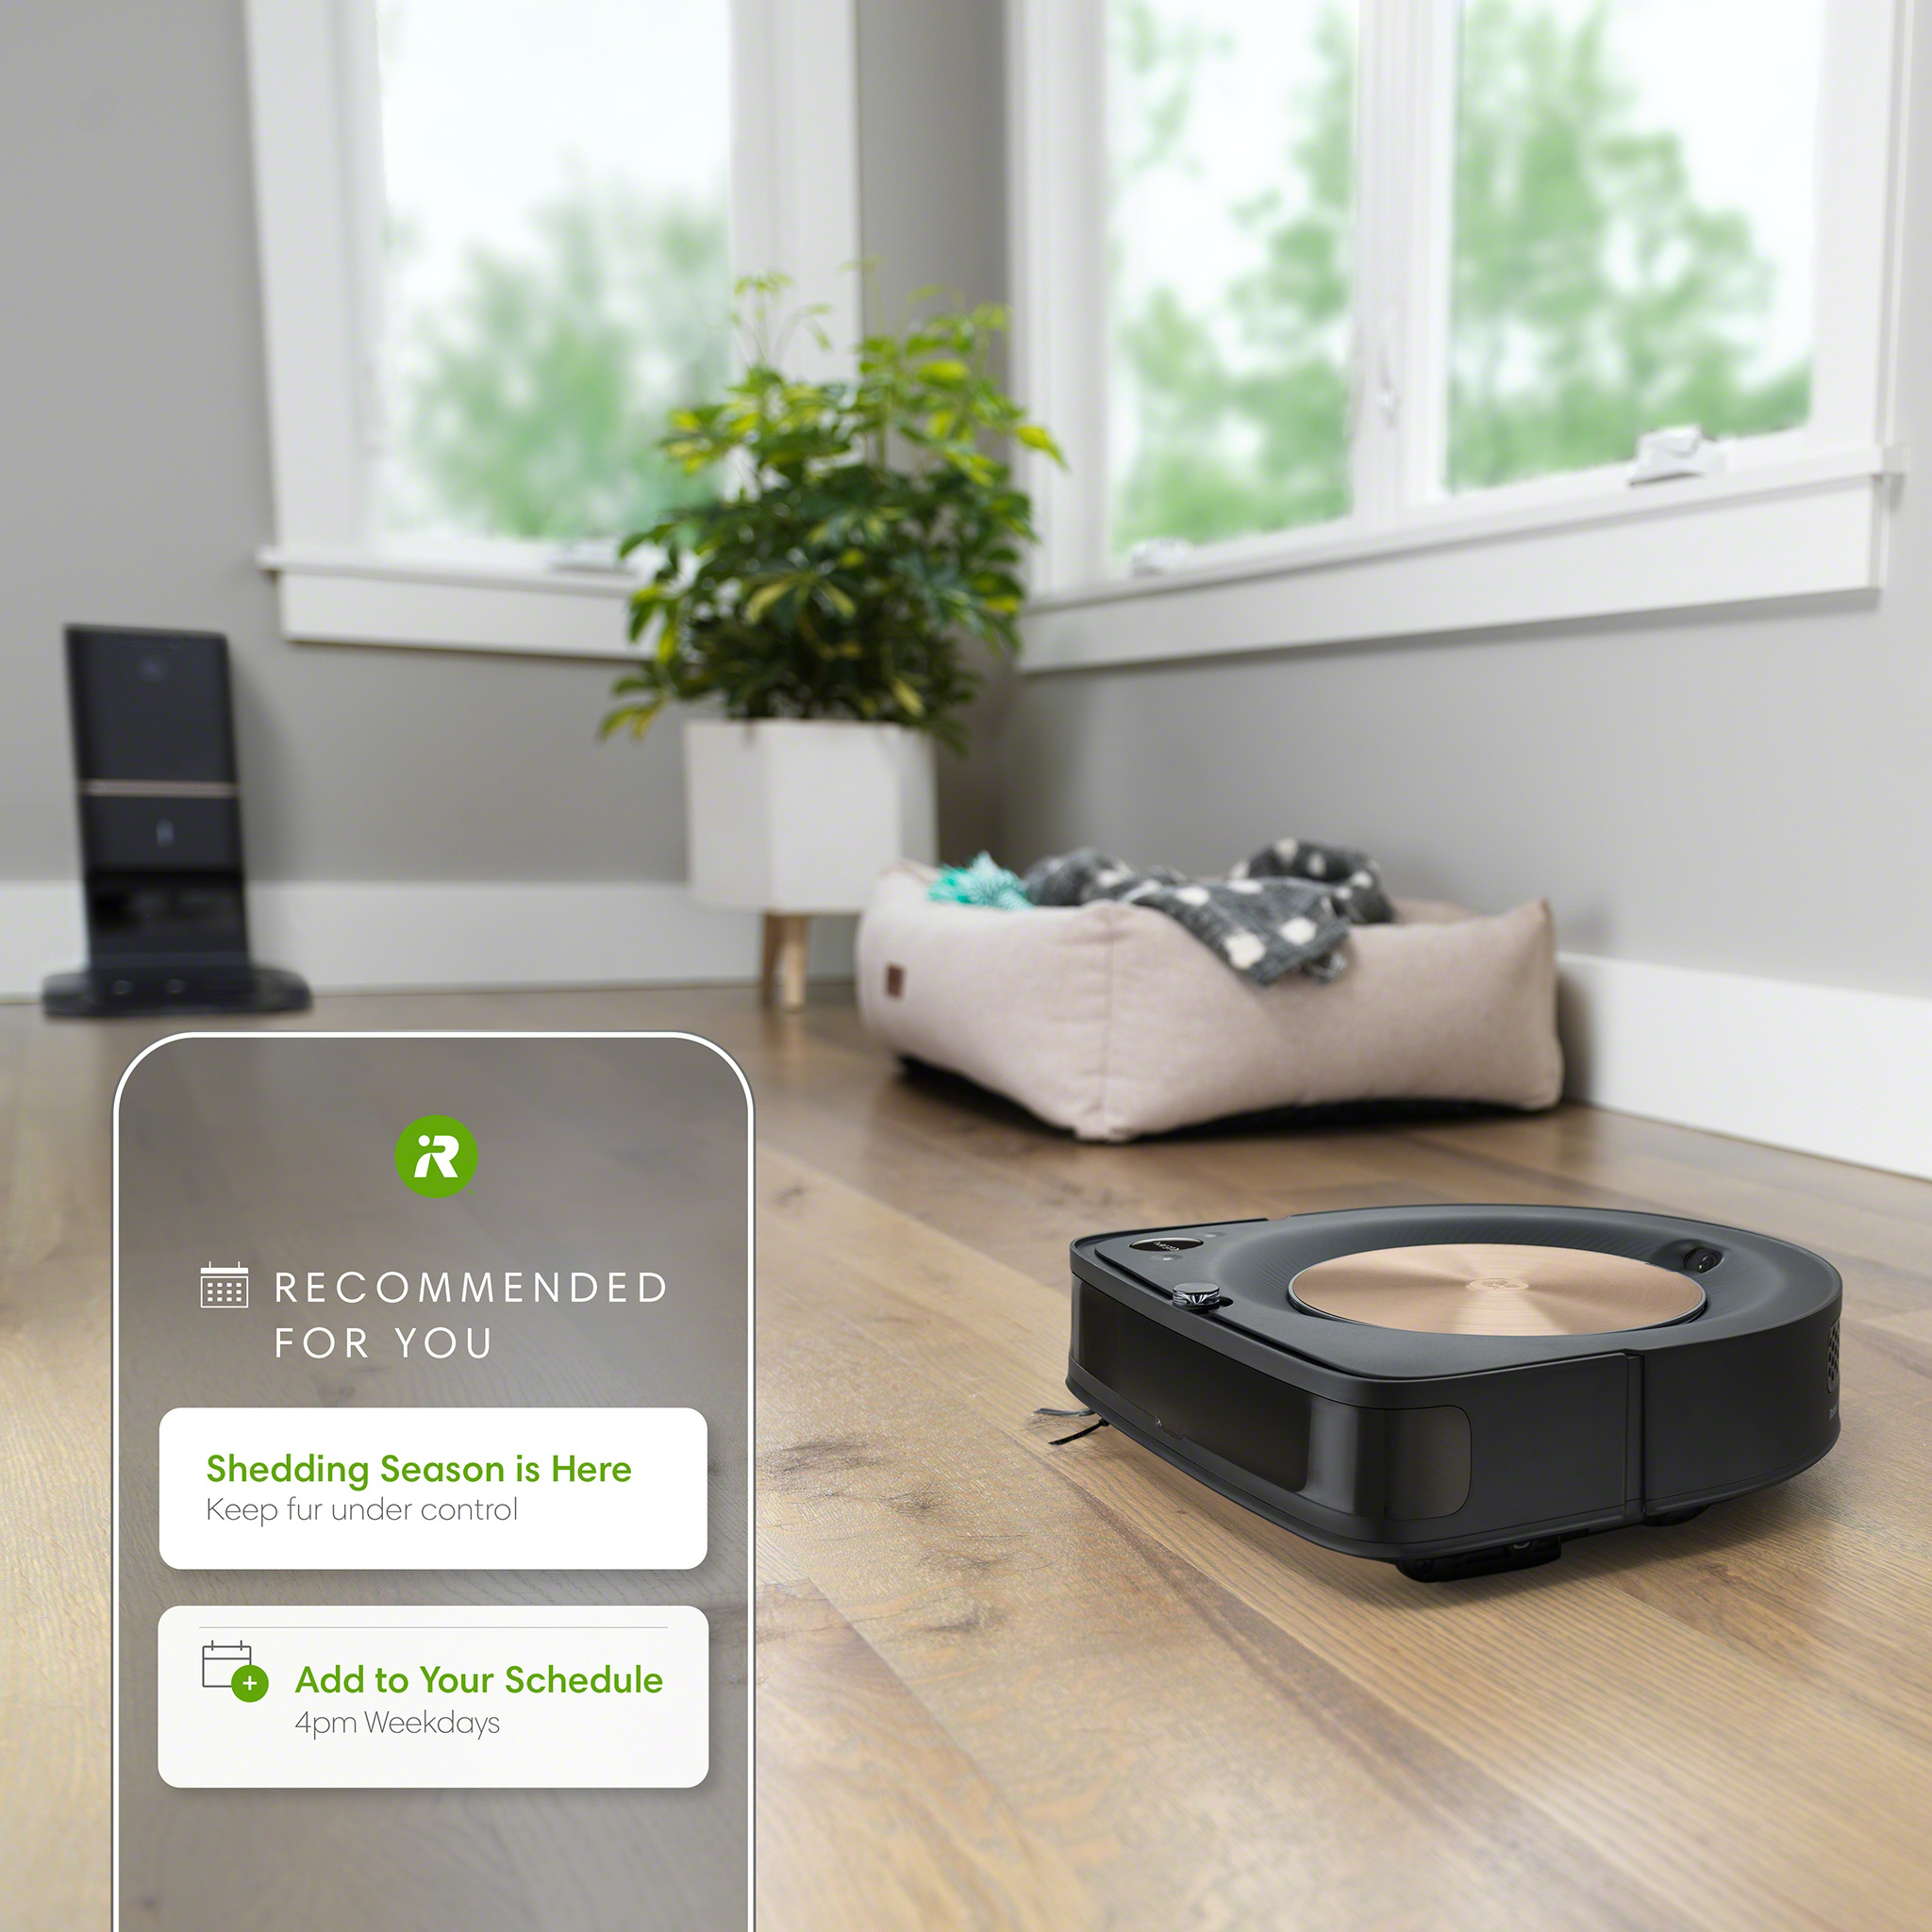 The new iRobot Home App can make personalized cleaning suggestions for when your home may need more frequent cleaning, such as pet-shedding or allergy seasons.